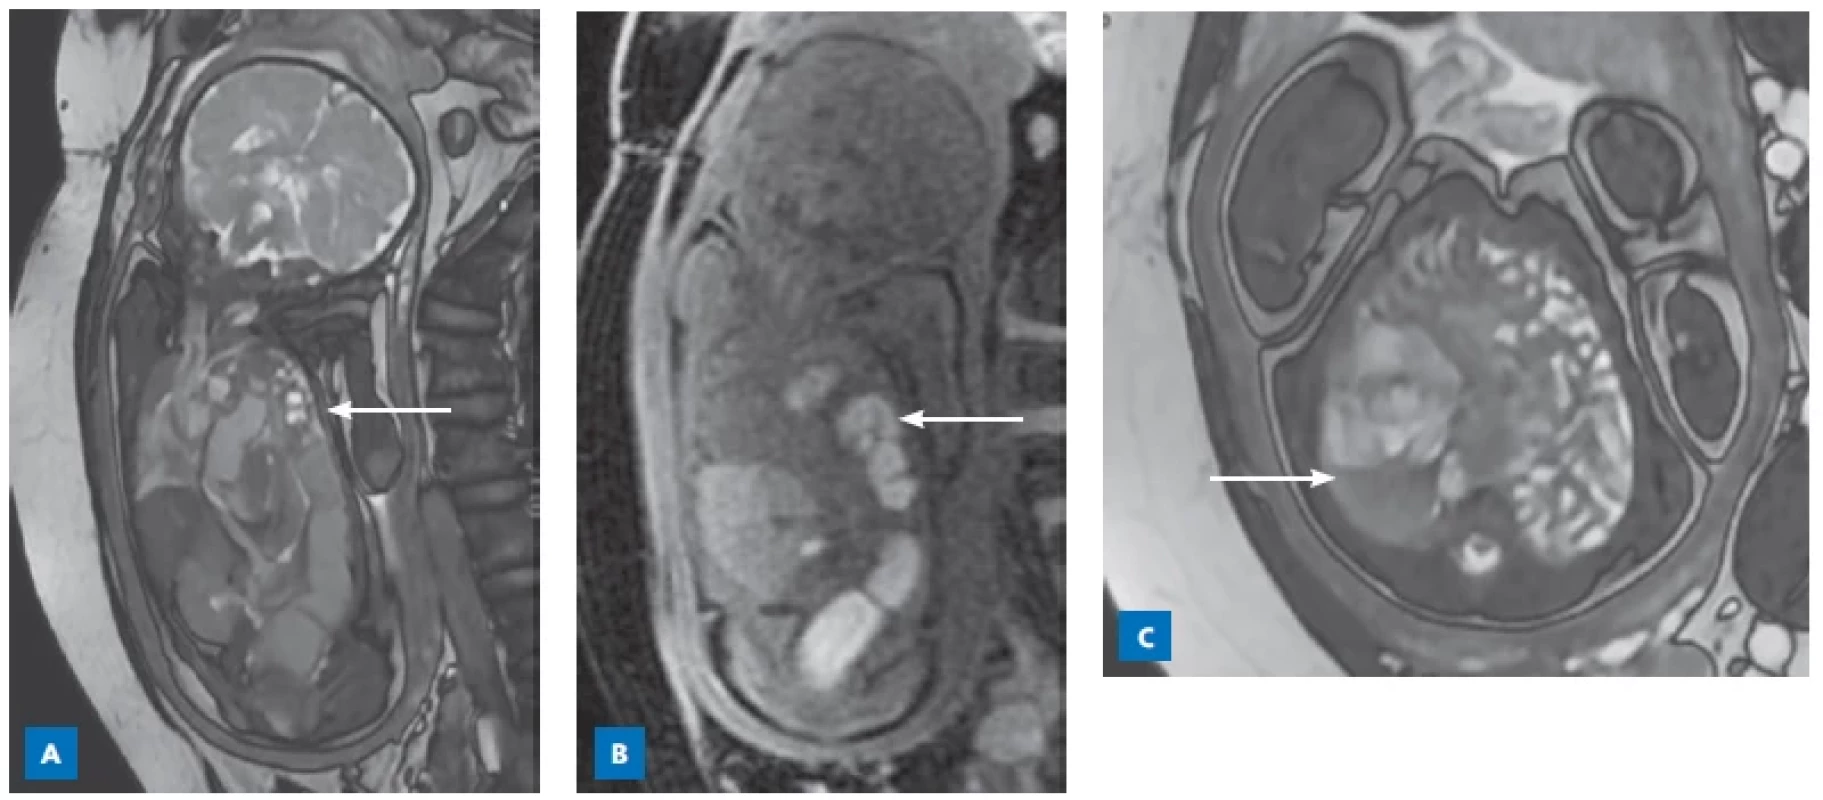 A 40-week-old fetus with no prenatal care presents with a large left hemidiaphragmatic hernia. A – Coronal Fast Image Employing
Steady State Acquision (FIESTA ) image demonstrating the absence of the left hemidiaphragm with partial herniation of the liver, colon, and small
bowel loops in to the left hemithoracic cavity (arrow) causing mediastinal shift towards the left. B – Coronal Liver Acceleration Volume Acquisition
(LAVA, T1-weighted) image demonstrating herniated meconium-filled colon within the left hemithoracic cavity (meconium has high T1 signal)
(arrow). C – Axial FIESTA image demonstrating fluid-filled small bowel loops in the left hemithoracic cavity and displaced mediastinal structures
towards the right; a portion of the right lung can be partially seen in this image (arrow).